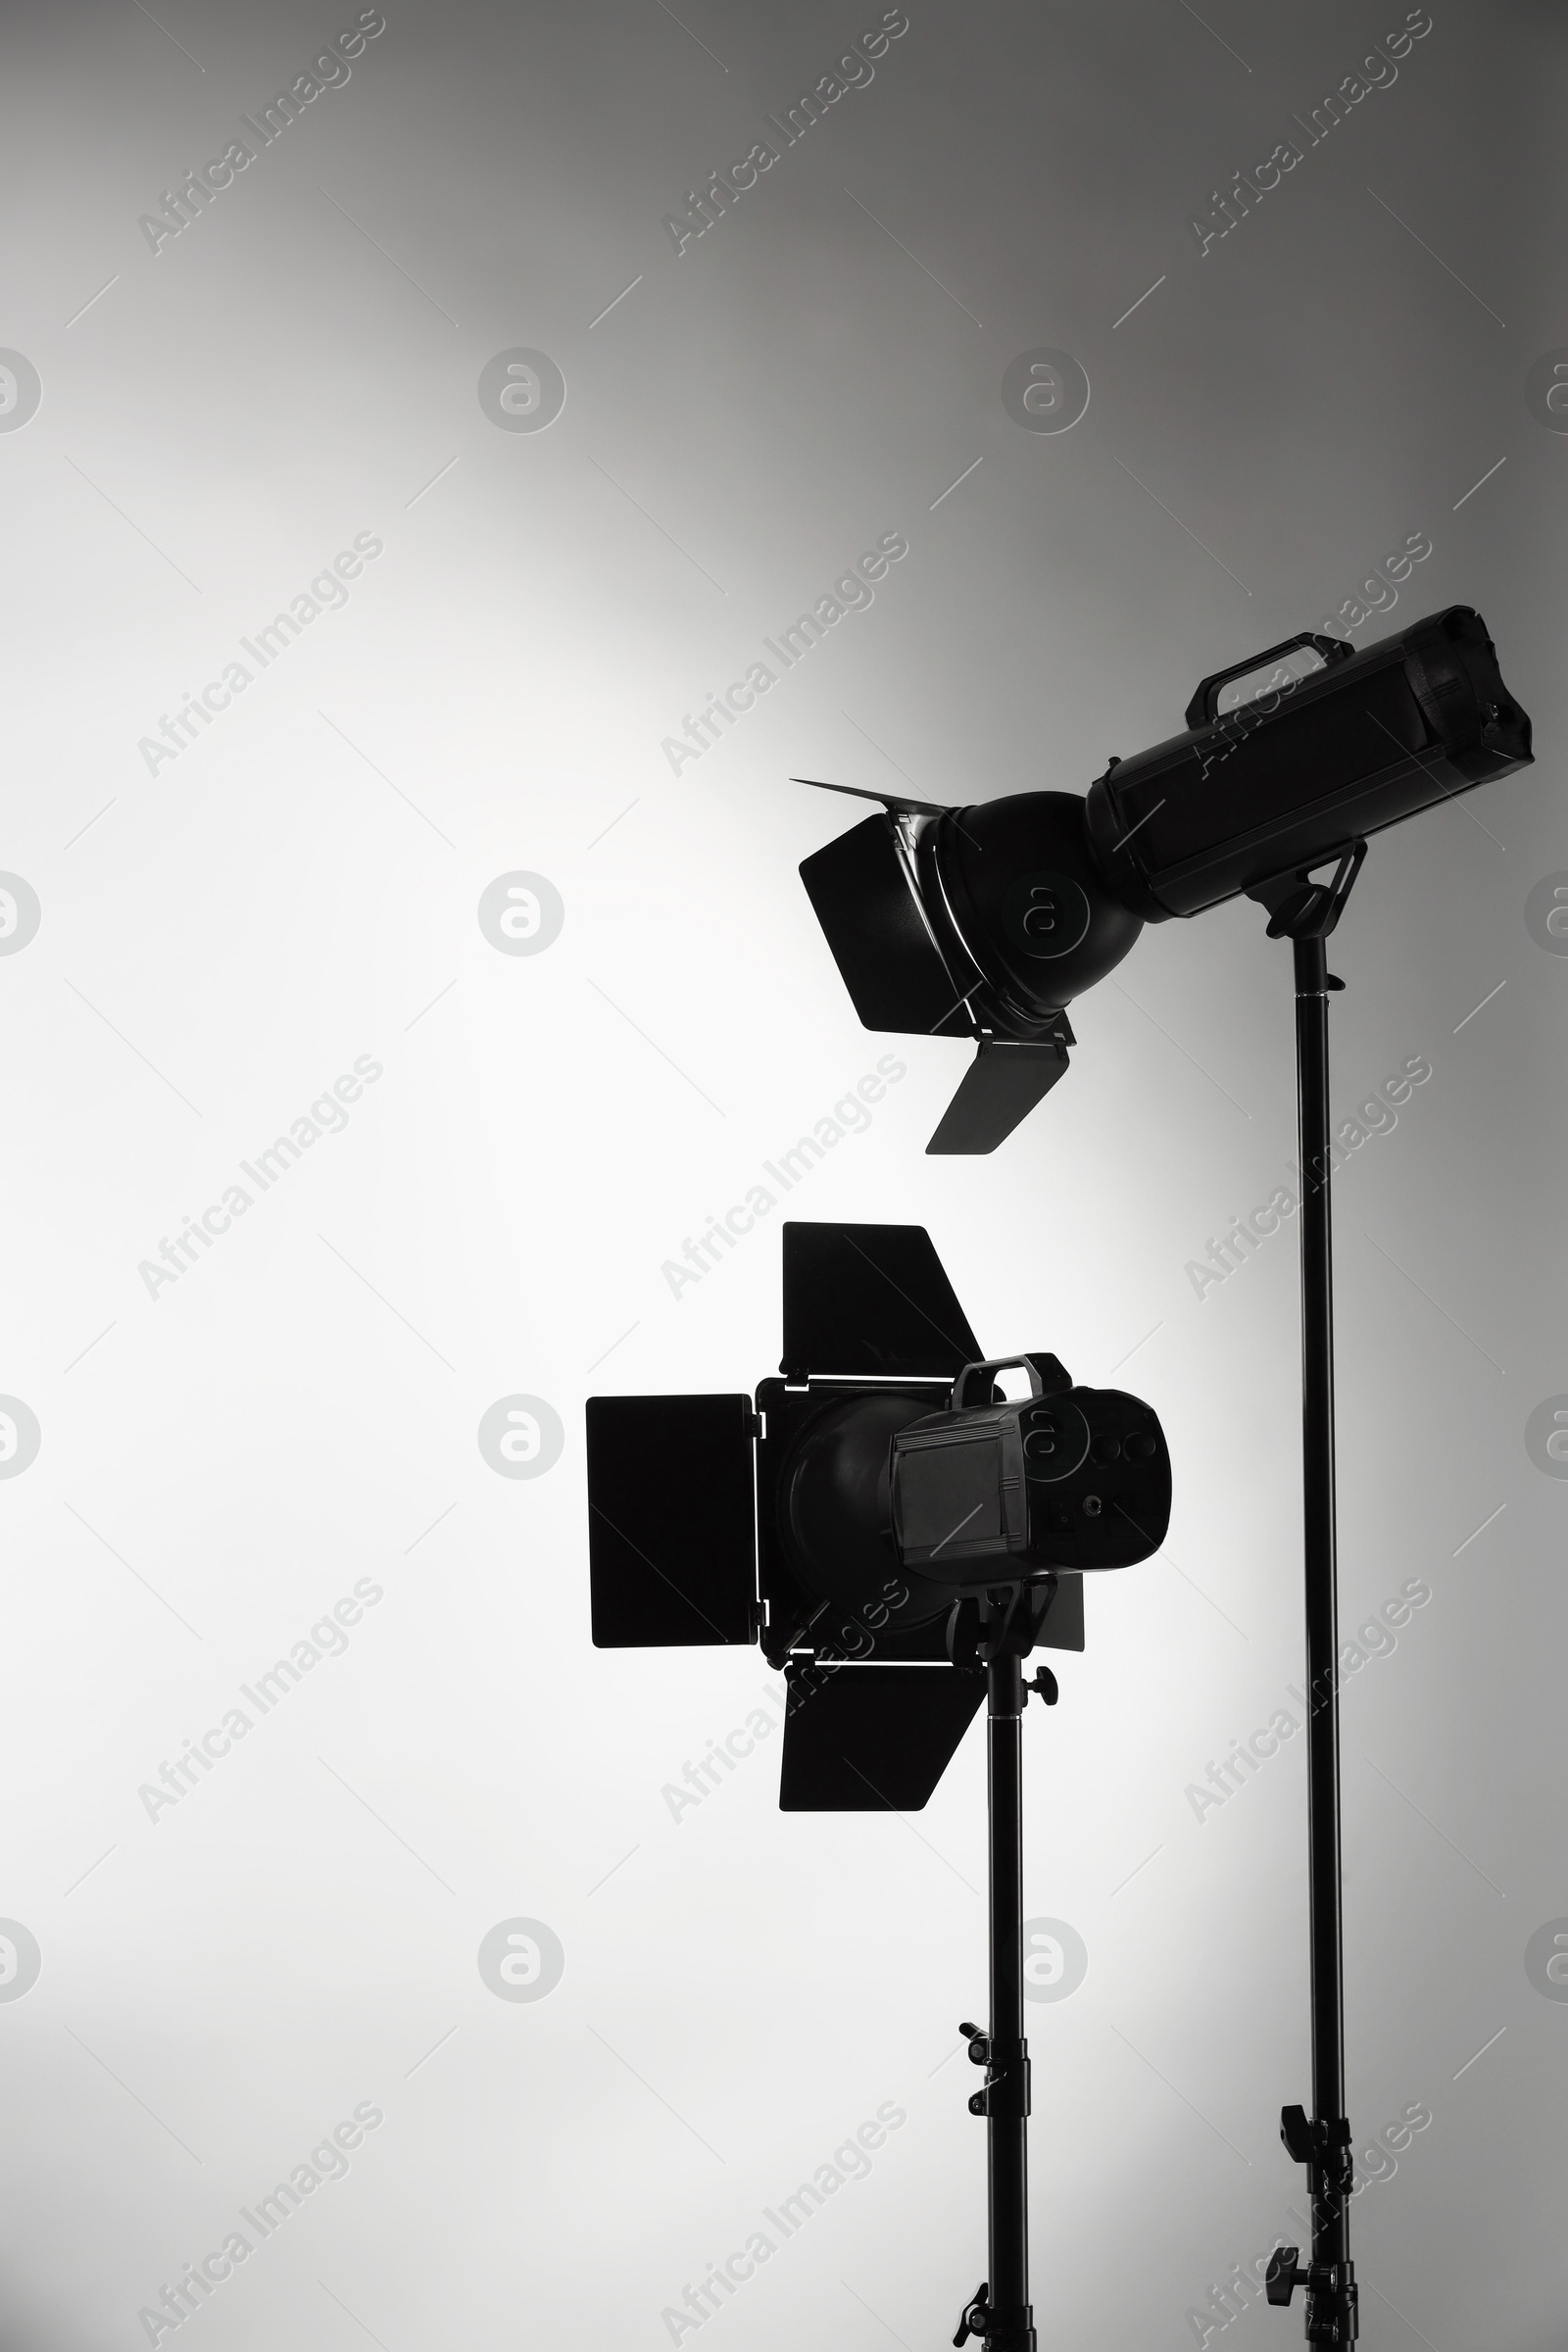 Photo of Grey photo background and professional lighting equipment in studio